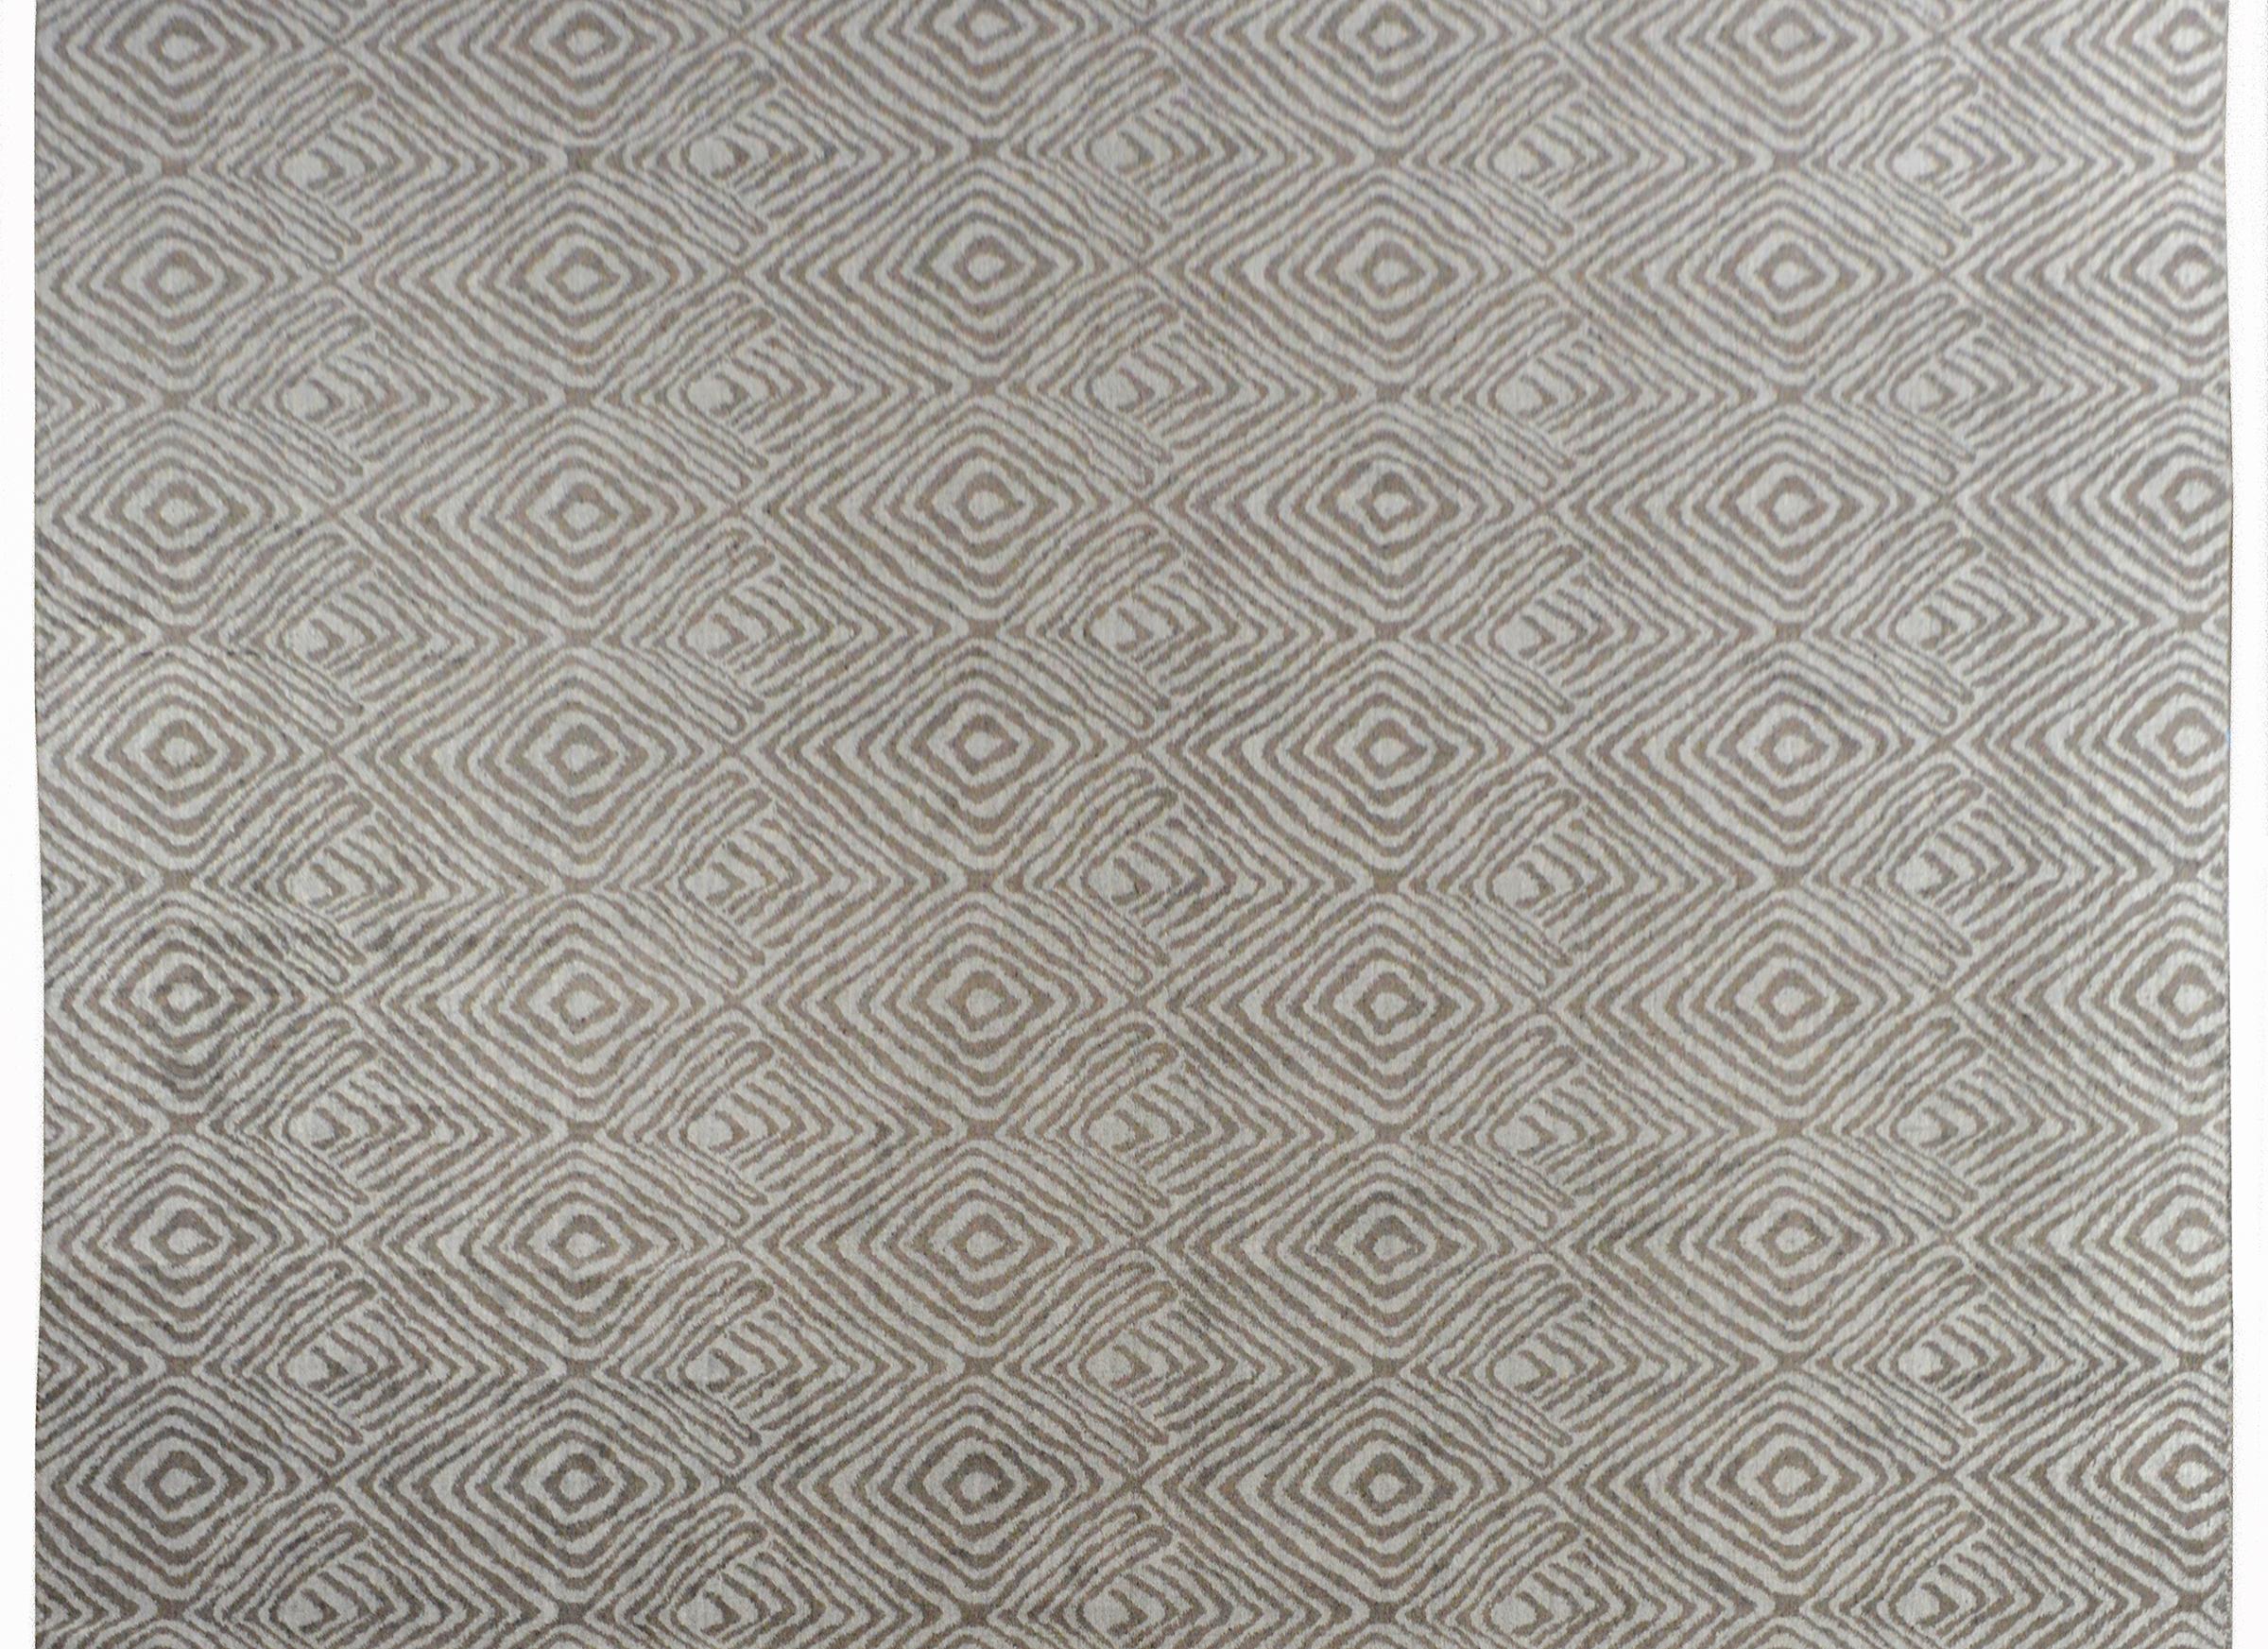 A super cool contemporary Indian rug with a mesmerizing thumbprint pattern woven in contrasting shades of gray, and without a border.